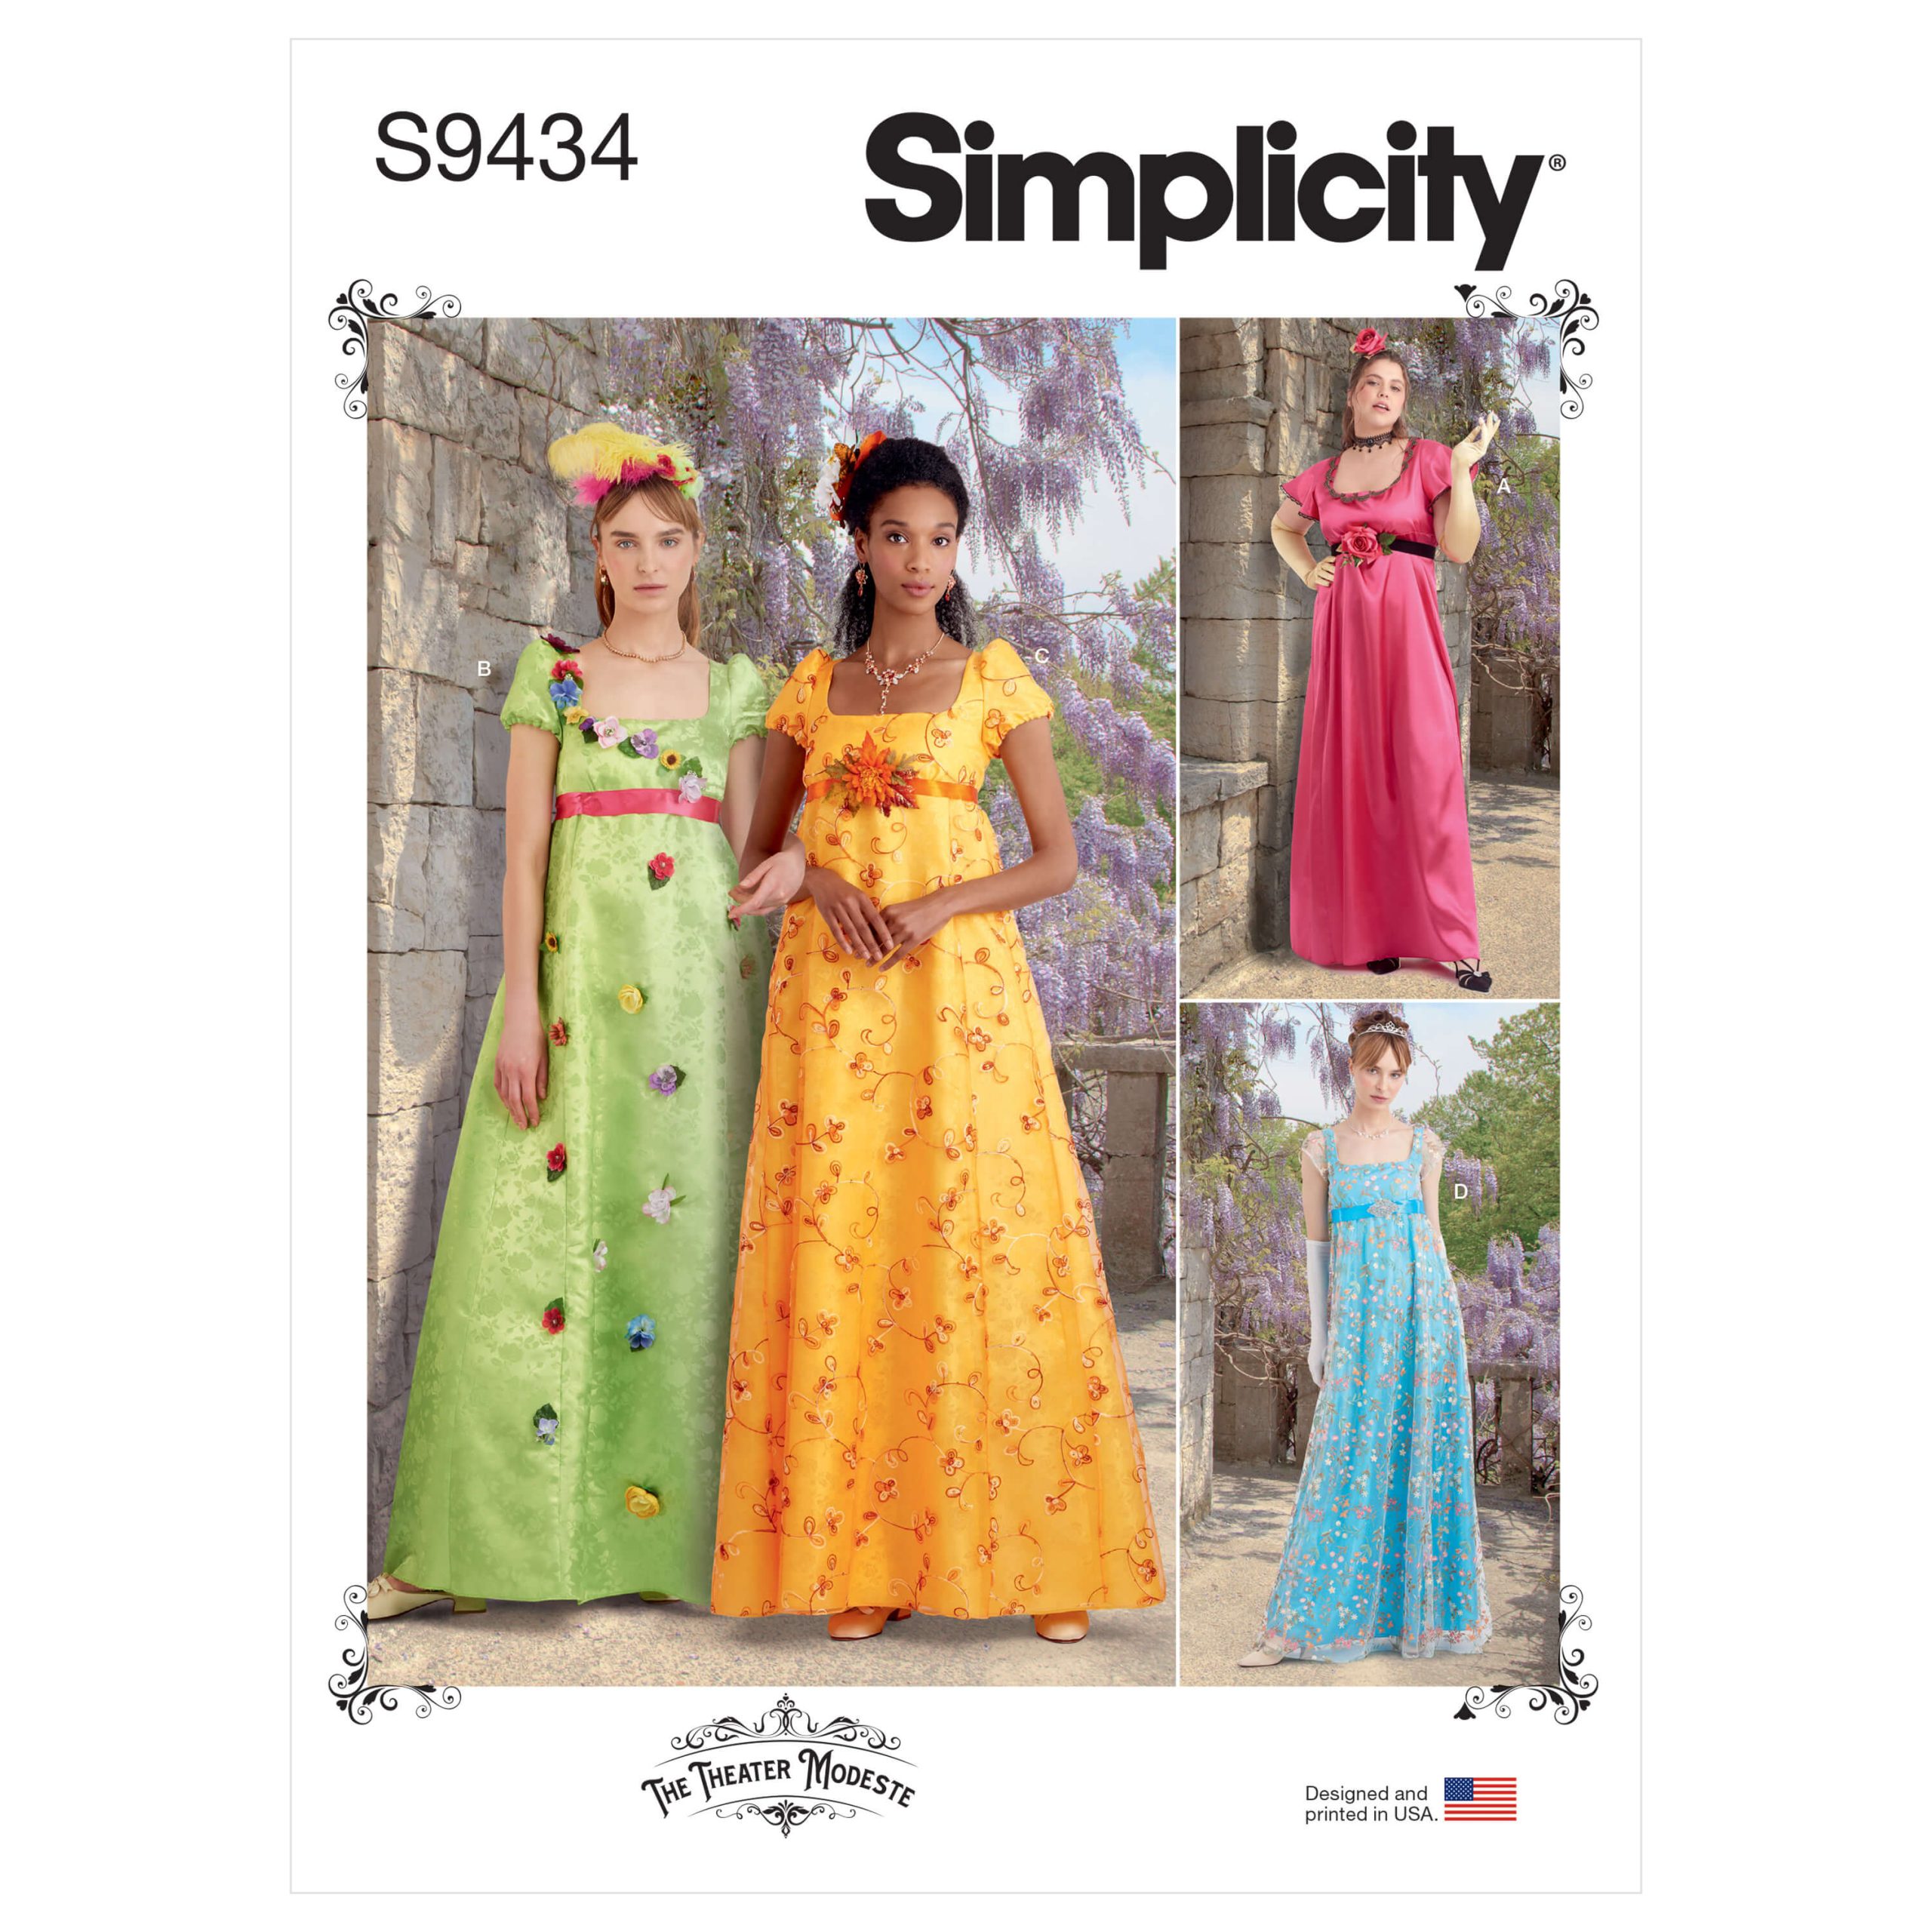 Simplicity Sewing Pattern S9434 Misses' and Women's Regency-style Dresses -  Sewdirect